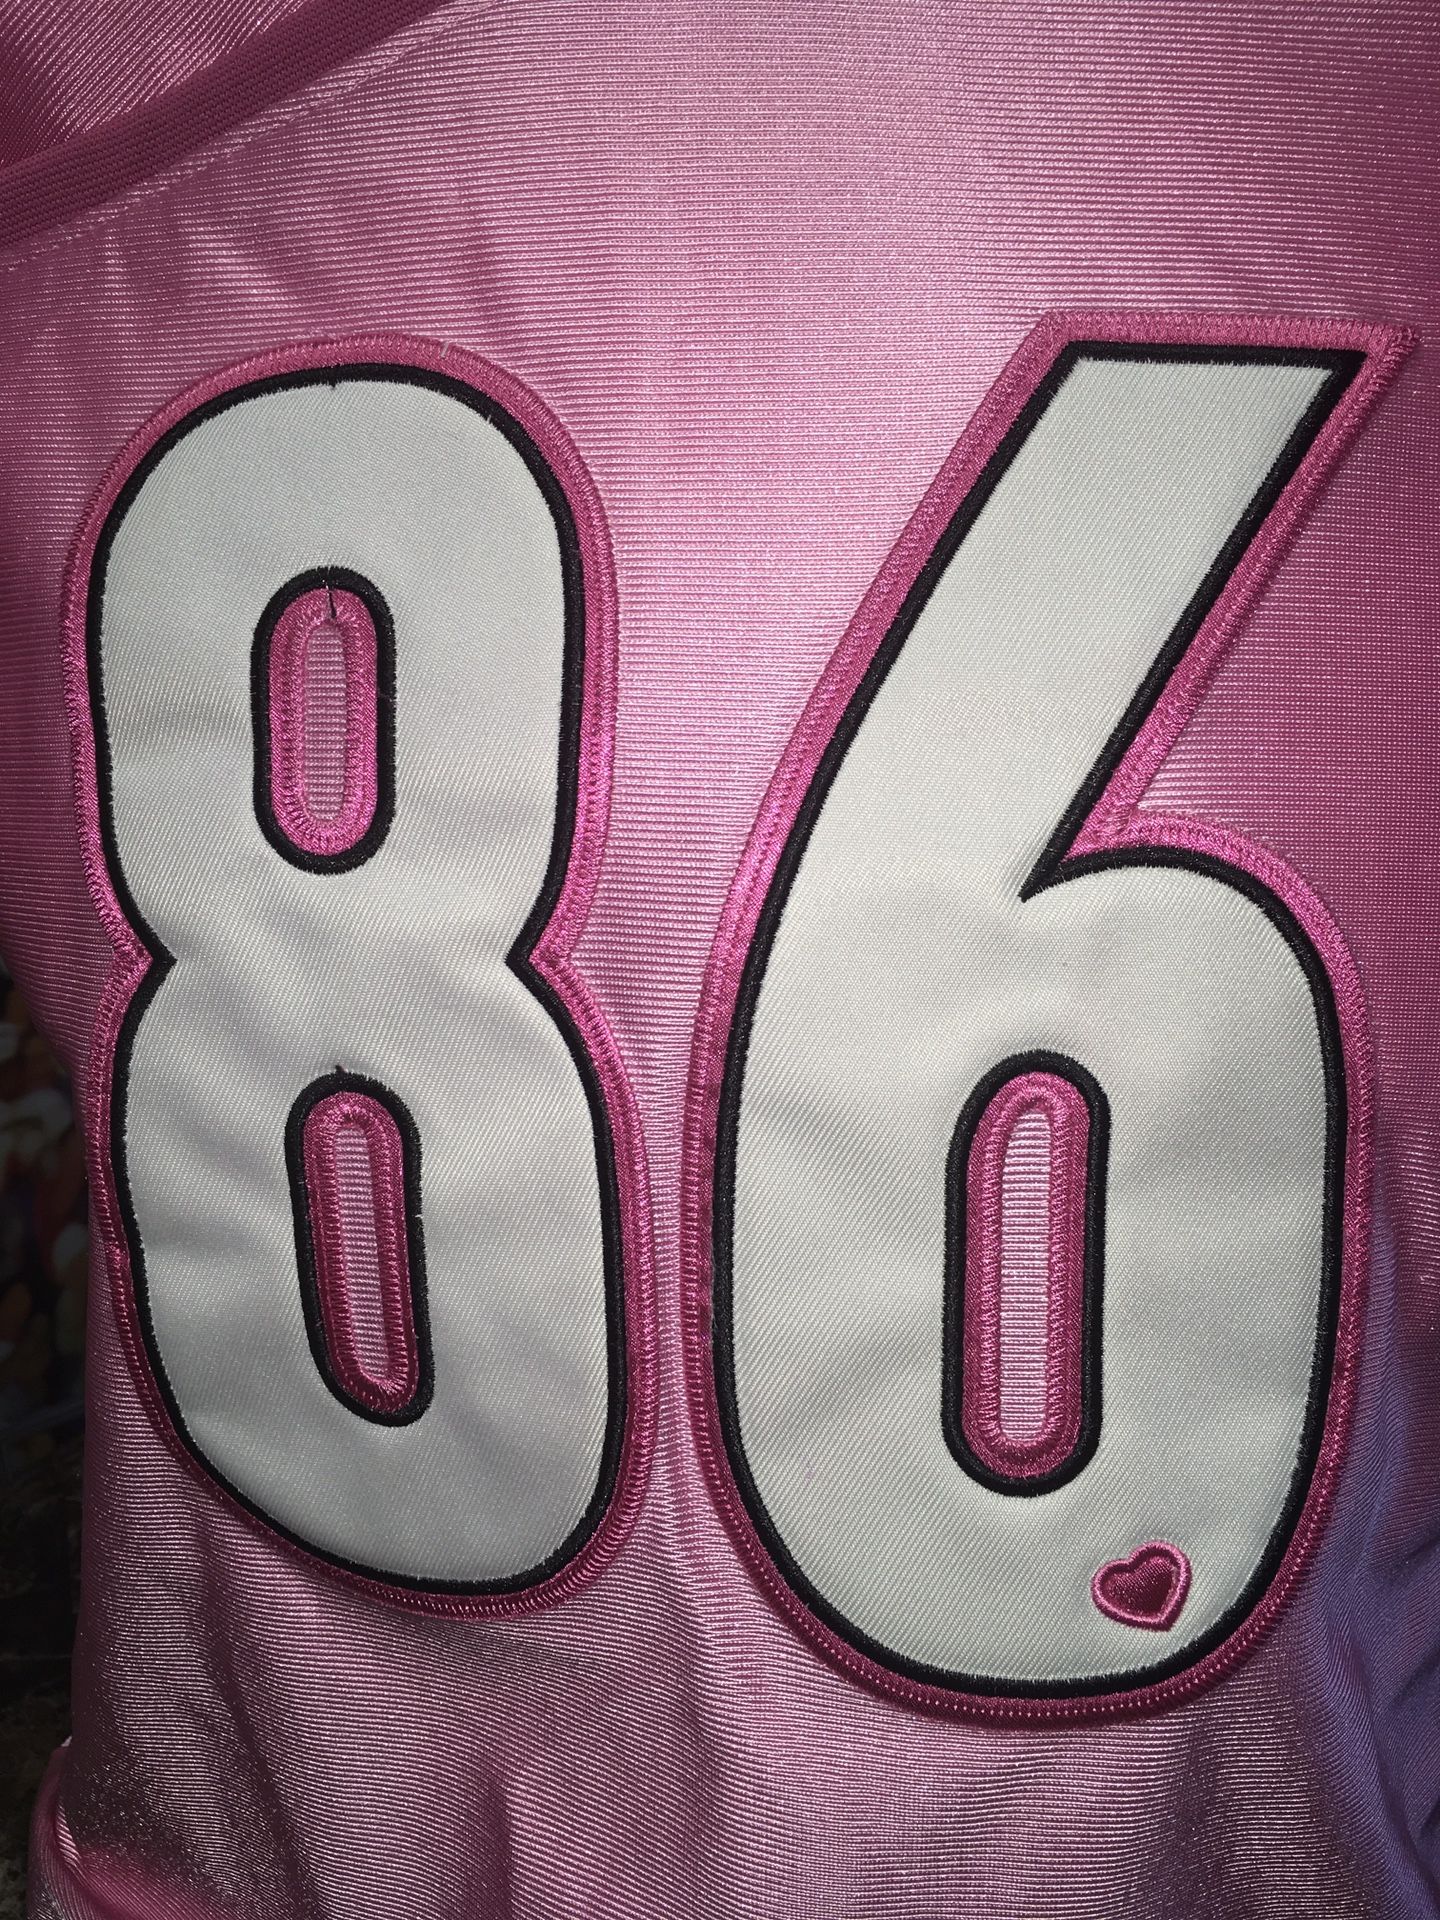 Hines Ward #86 Pittsburgh Steelers Reebok Jersey Breast Cancer Awareness Medium No rips, tears or stains